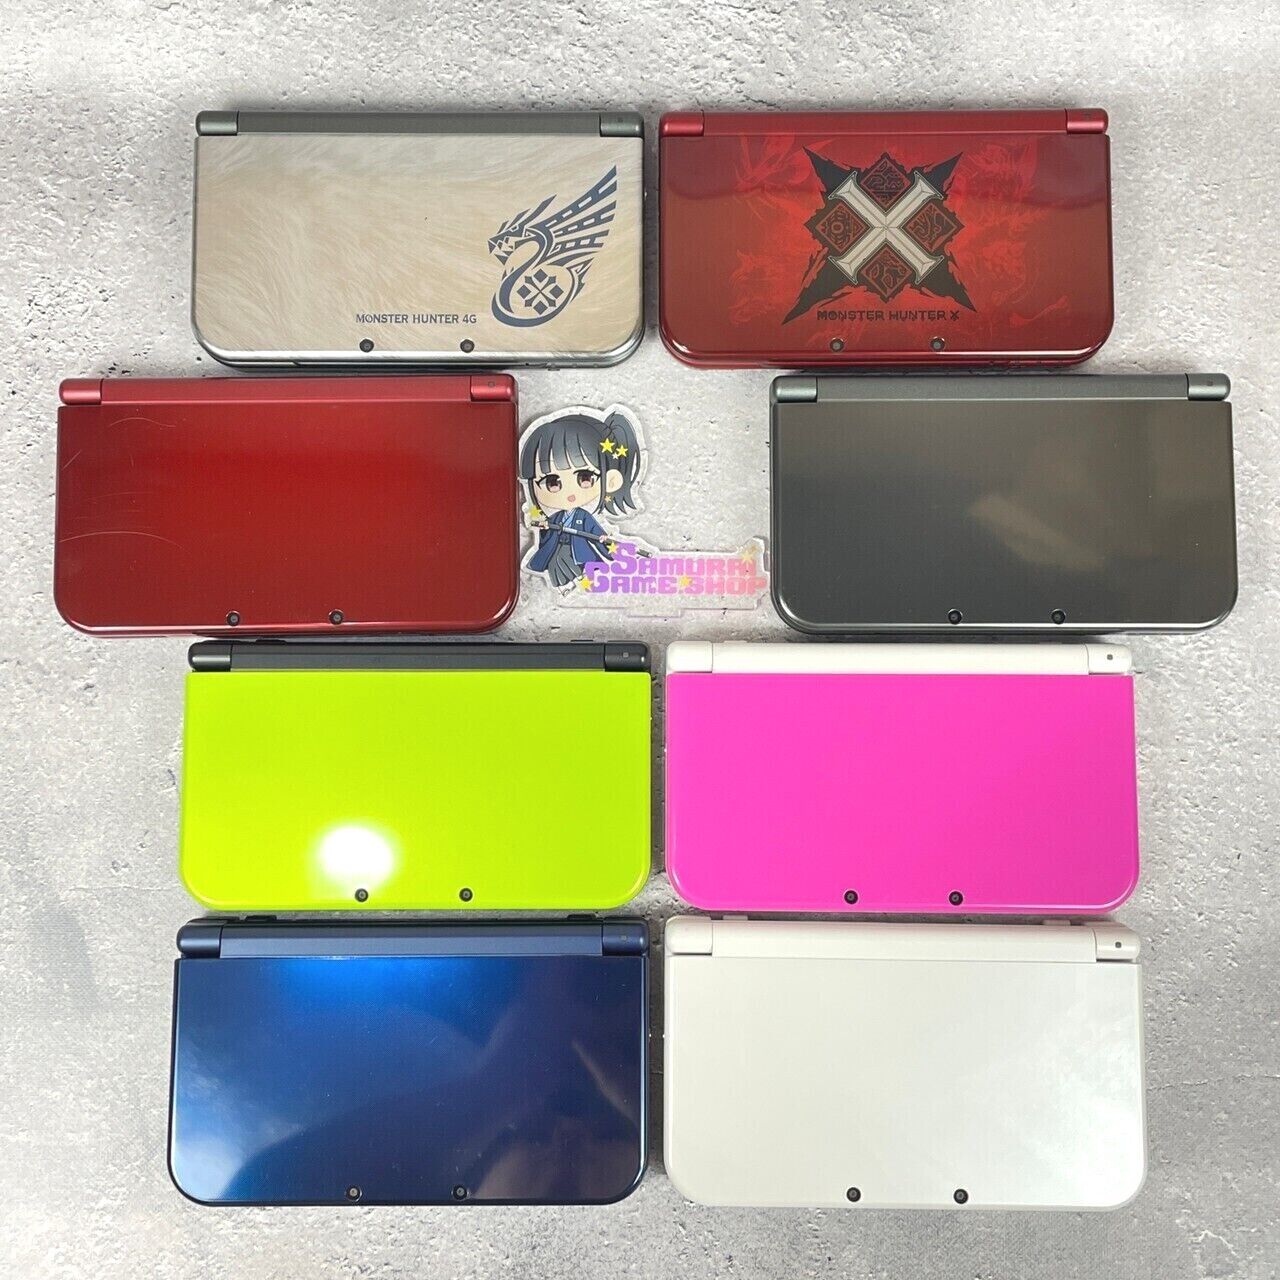 Nintendo new 3DS LL XL Game Console ONLY Japanese Language Edition Color Select